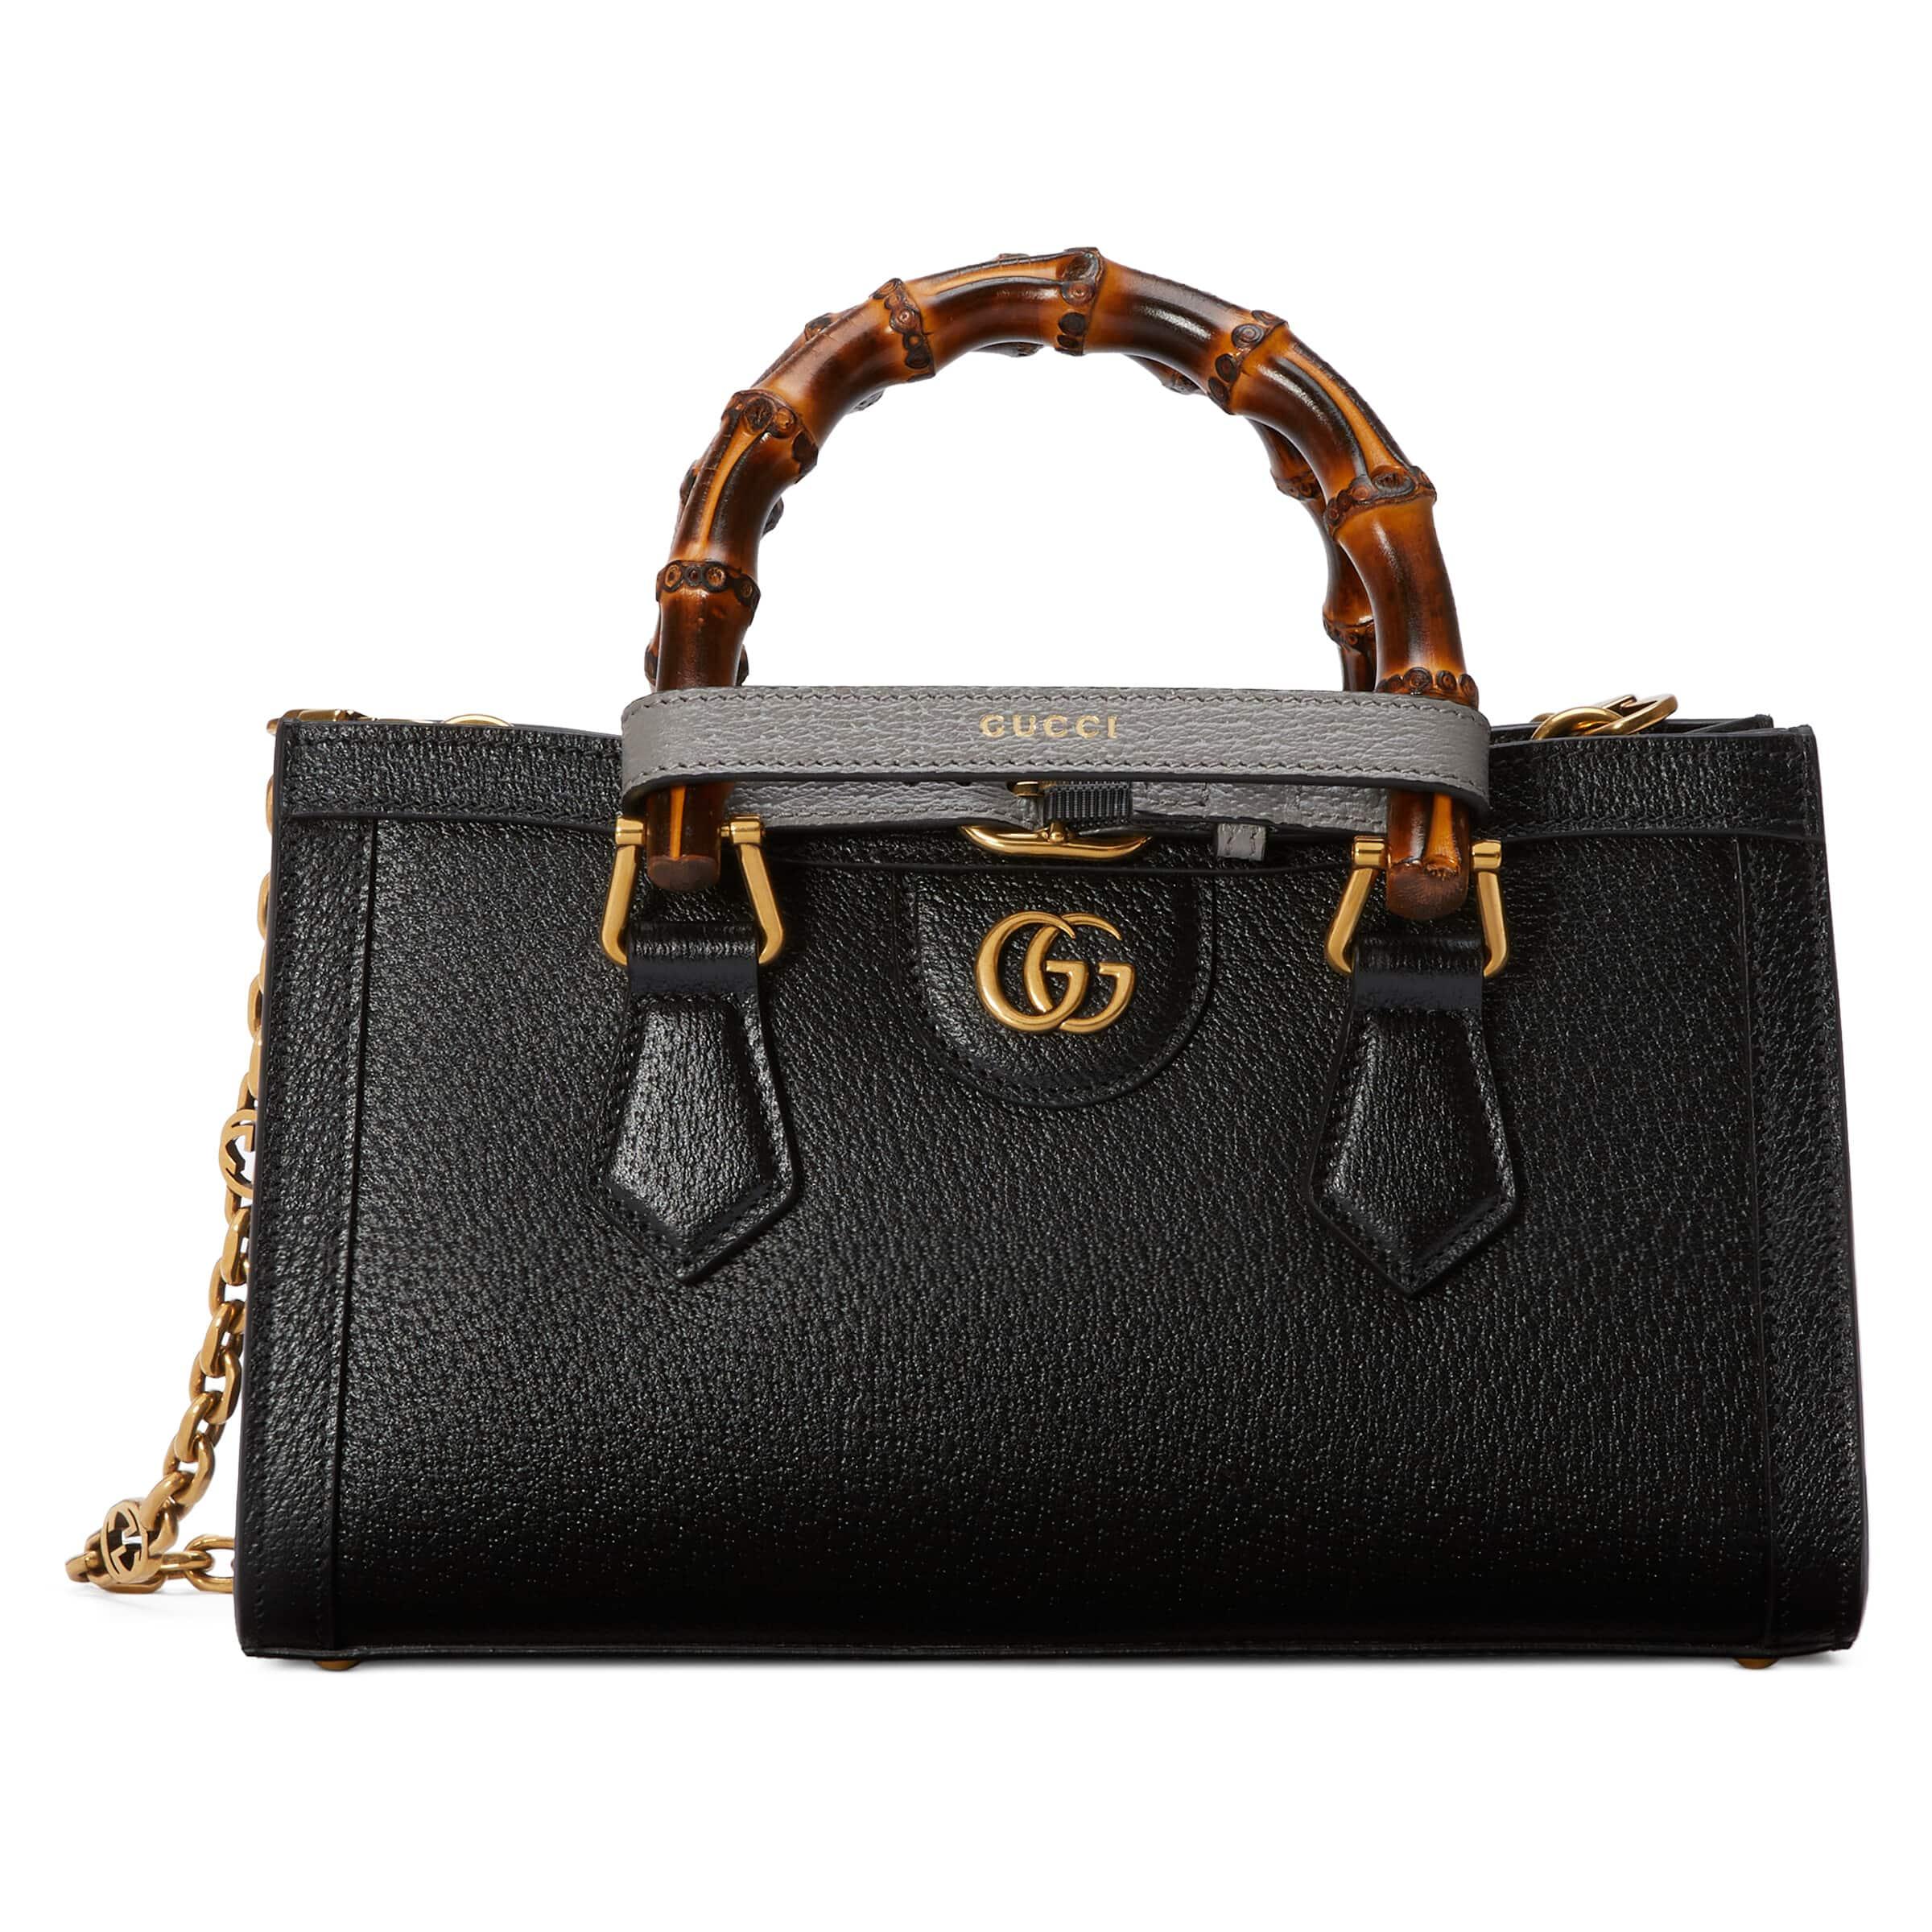 Gucci Diana Small Shoulder Bag in Black | Lyst